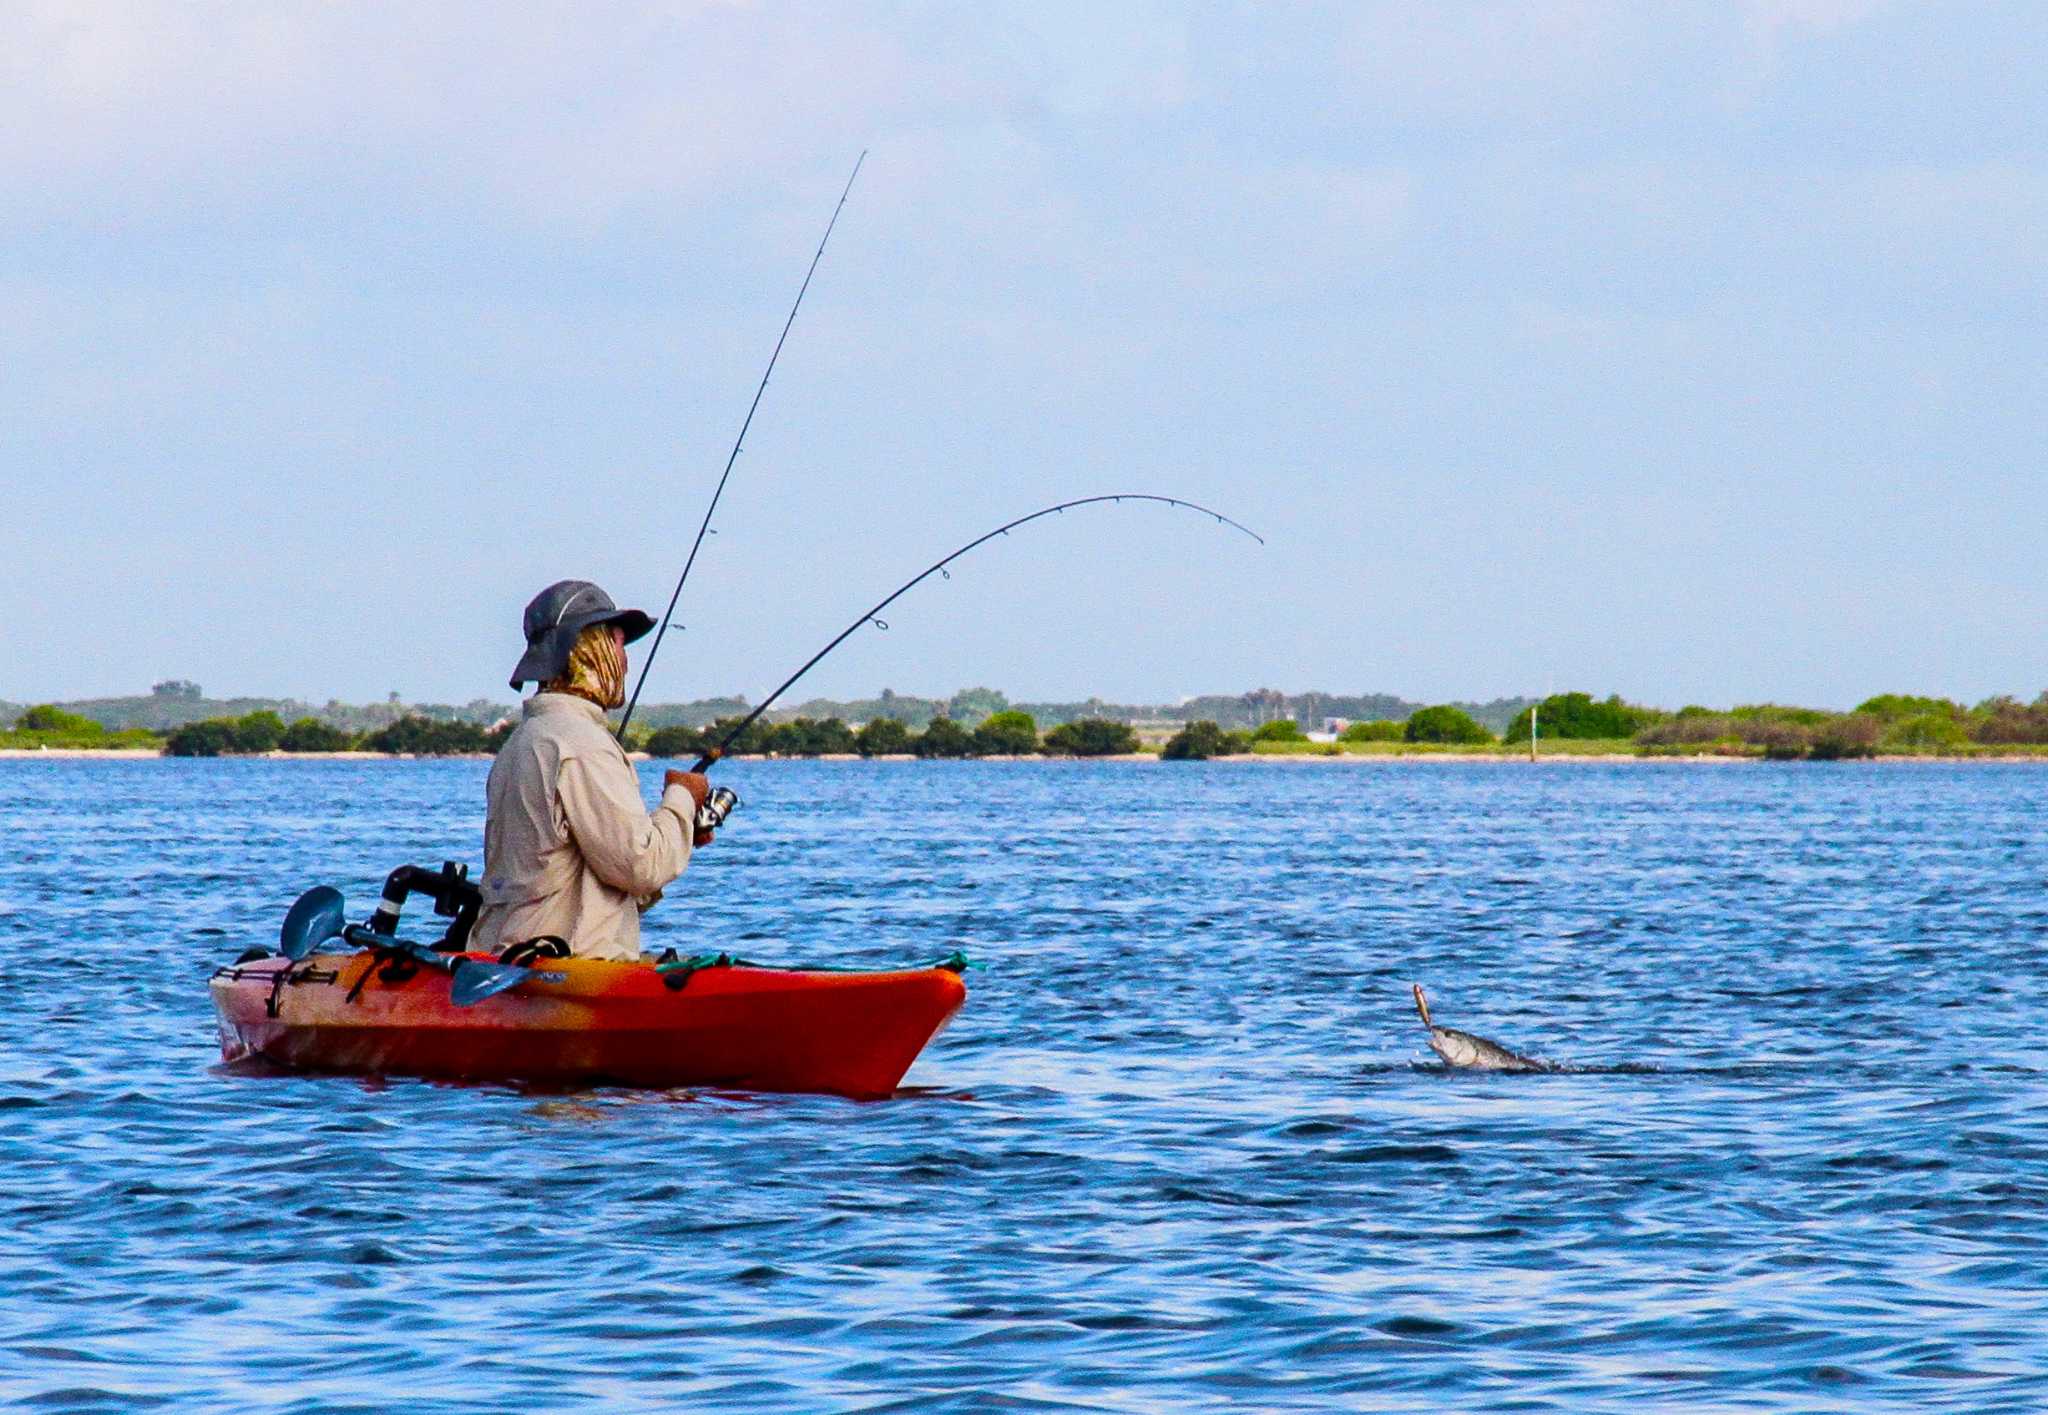 Where to go fishing in the Houston area.